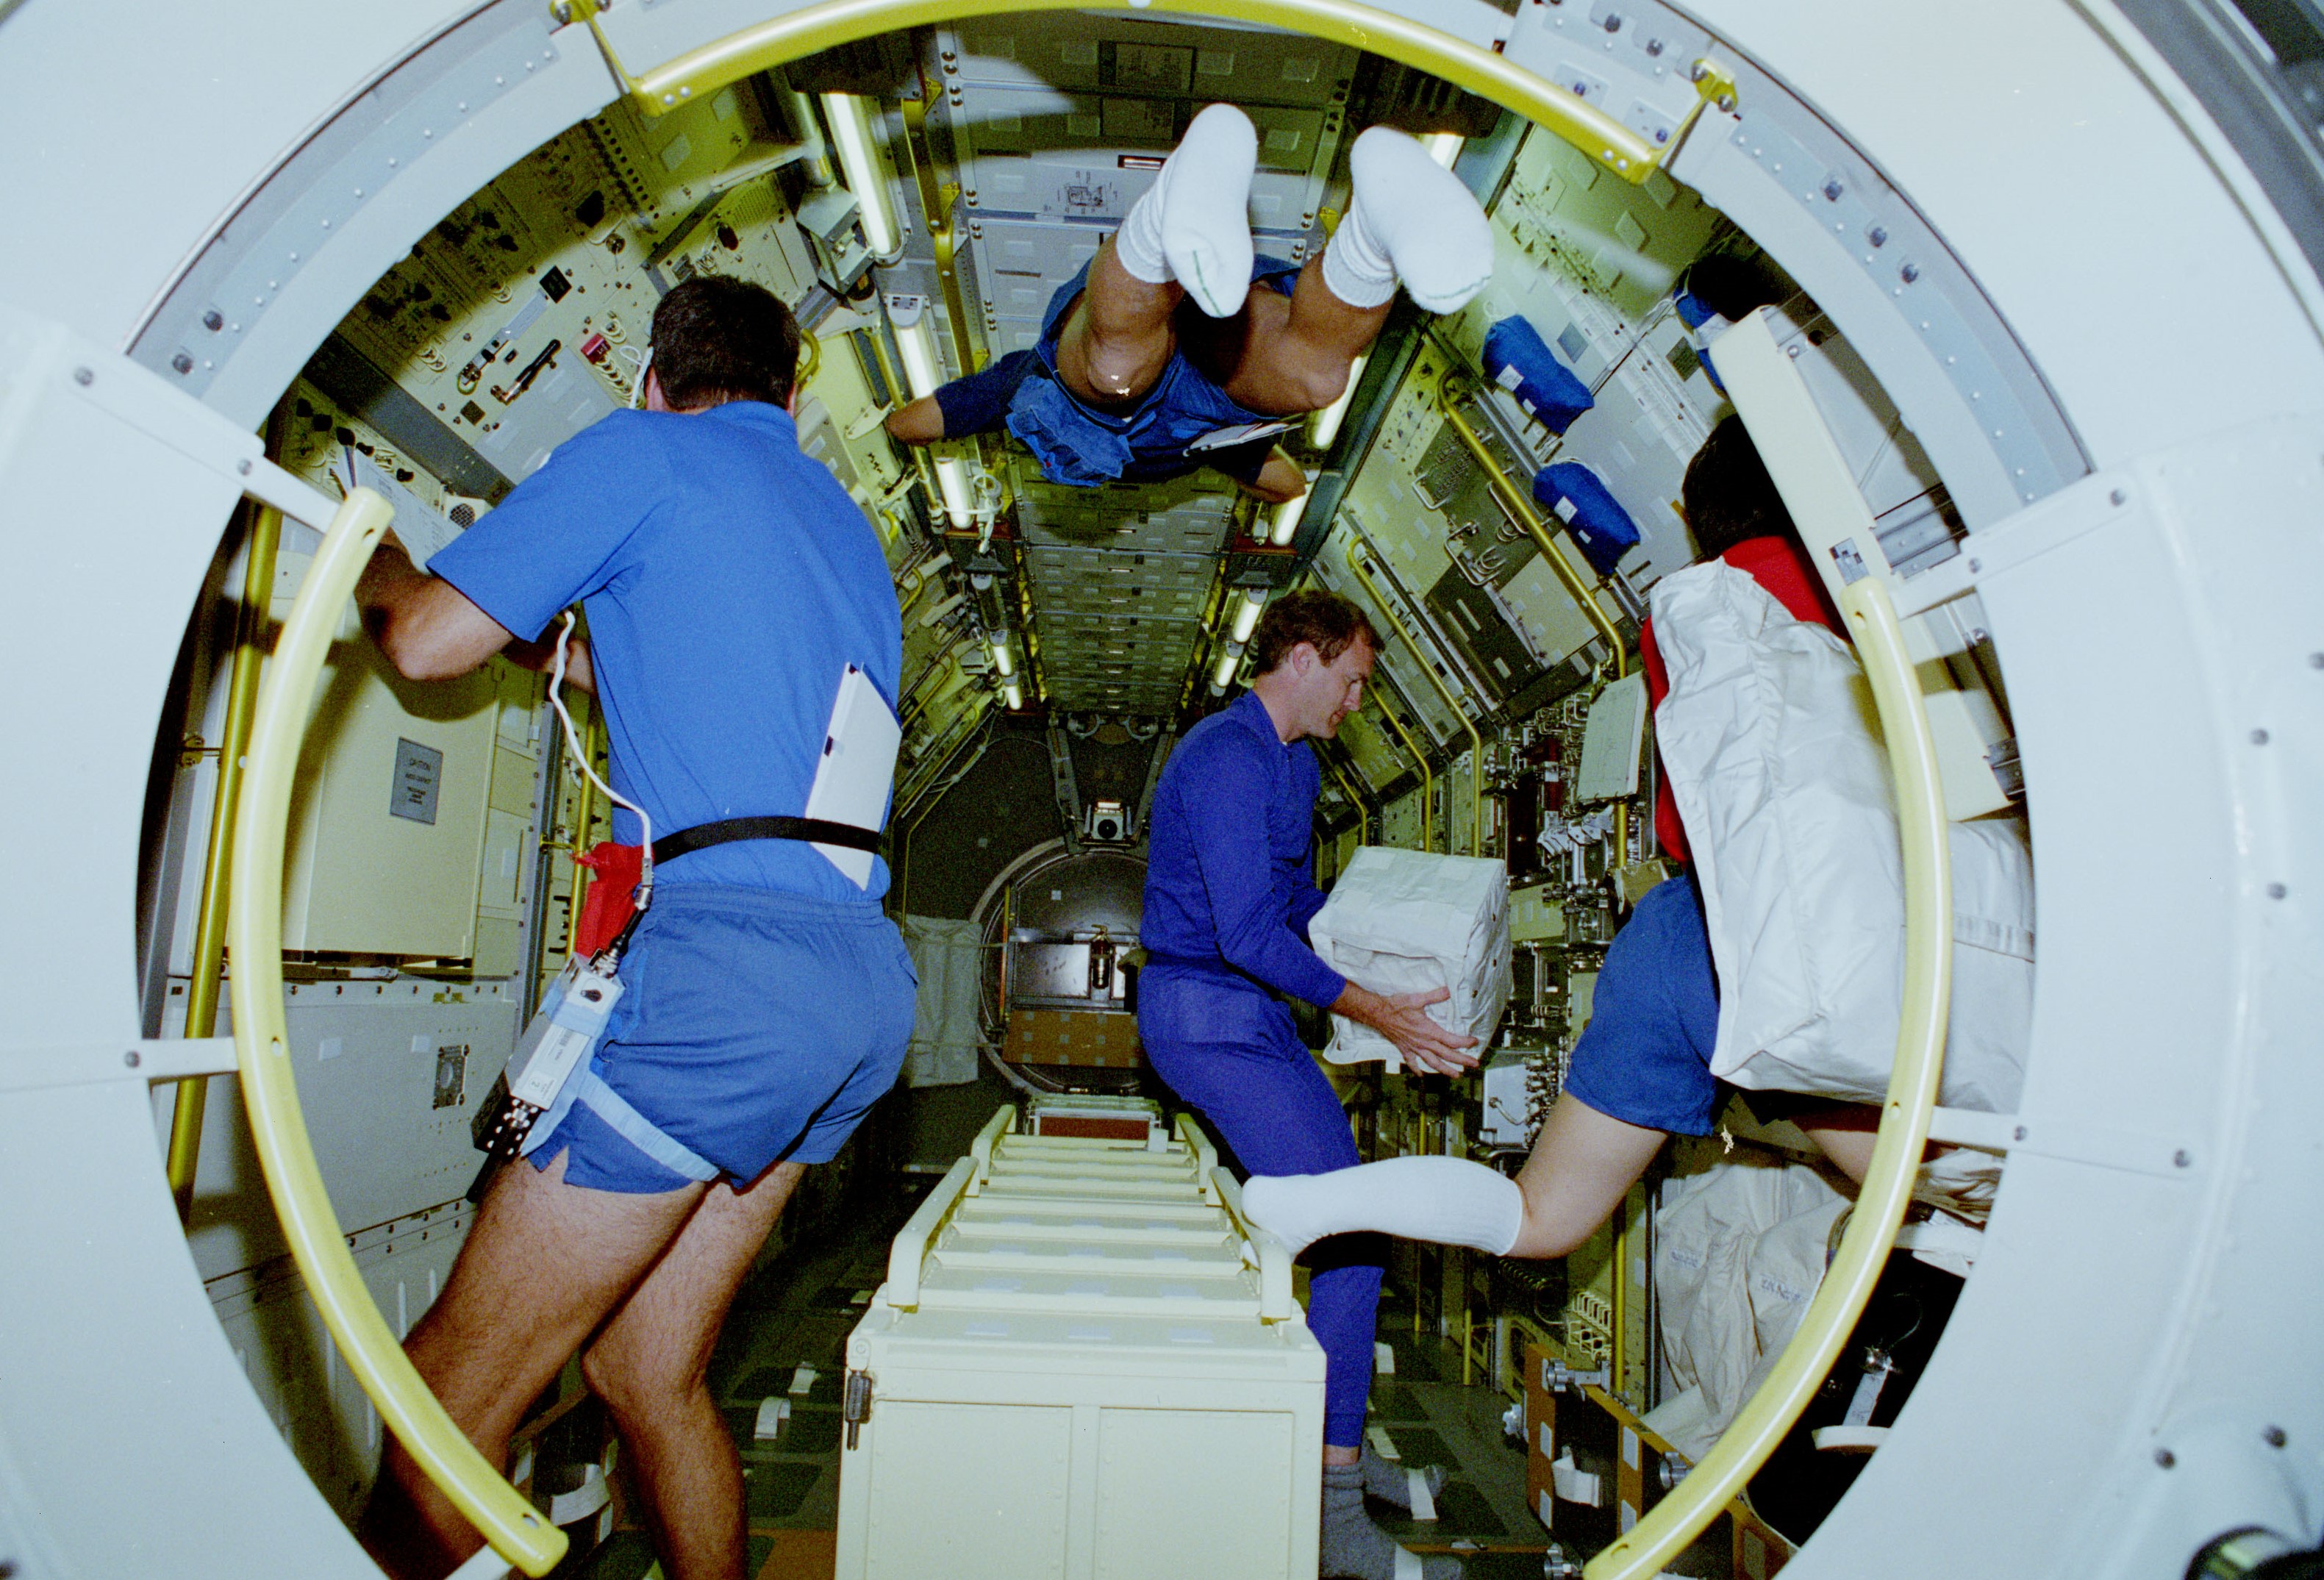 The view from the tunnel showing astronauts at work in the Spacelab module